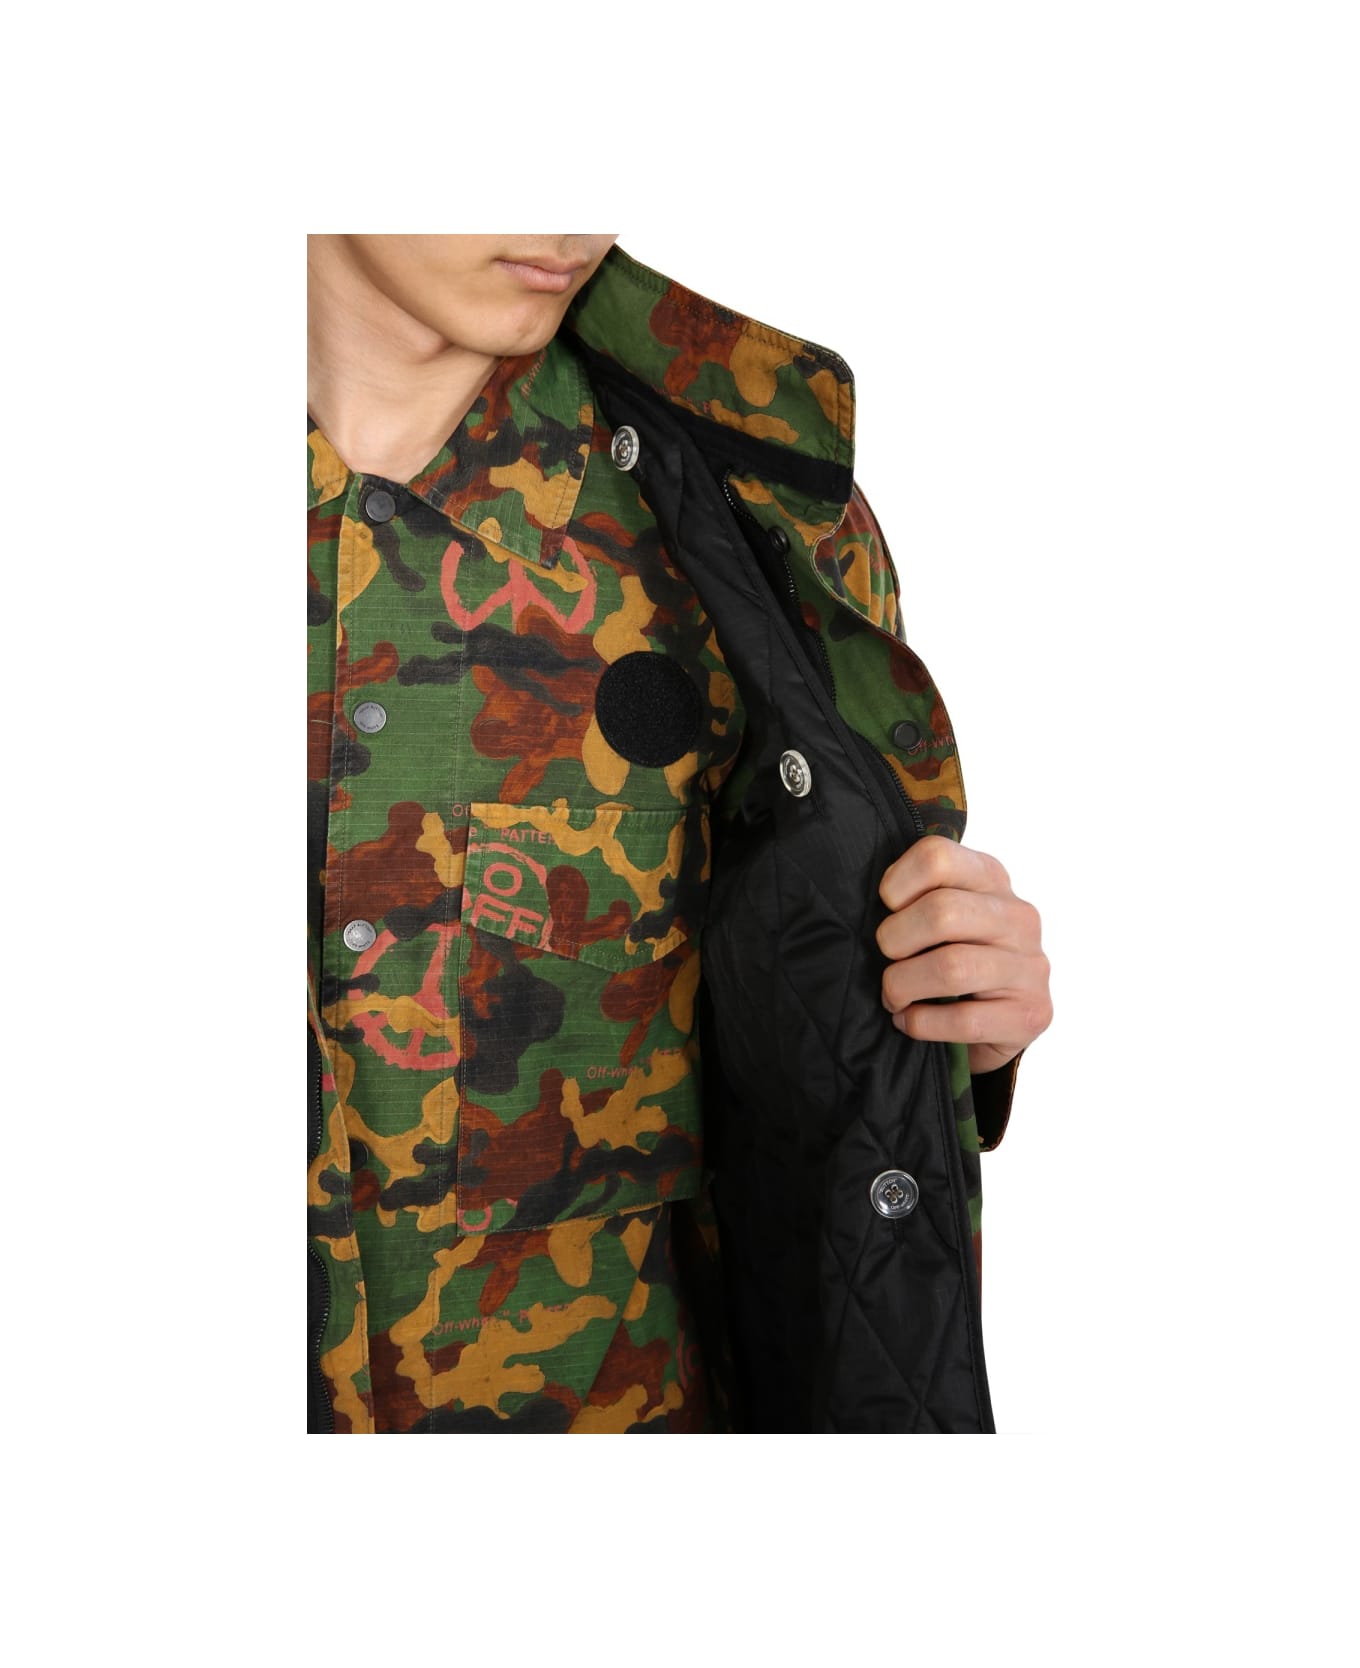 Off-White Padded Jacket - MILITARY GREEN